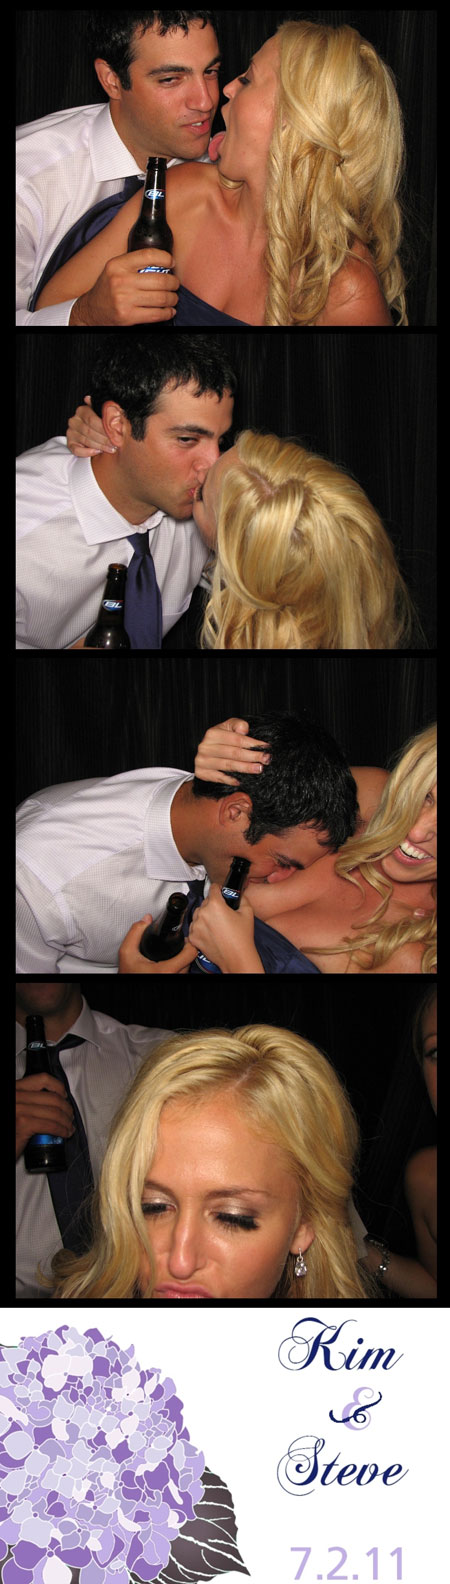 Drunk Kissing in a Photobooth